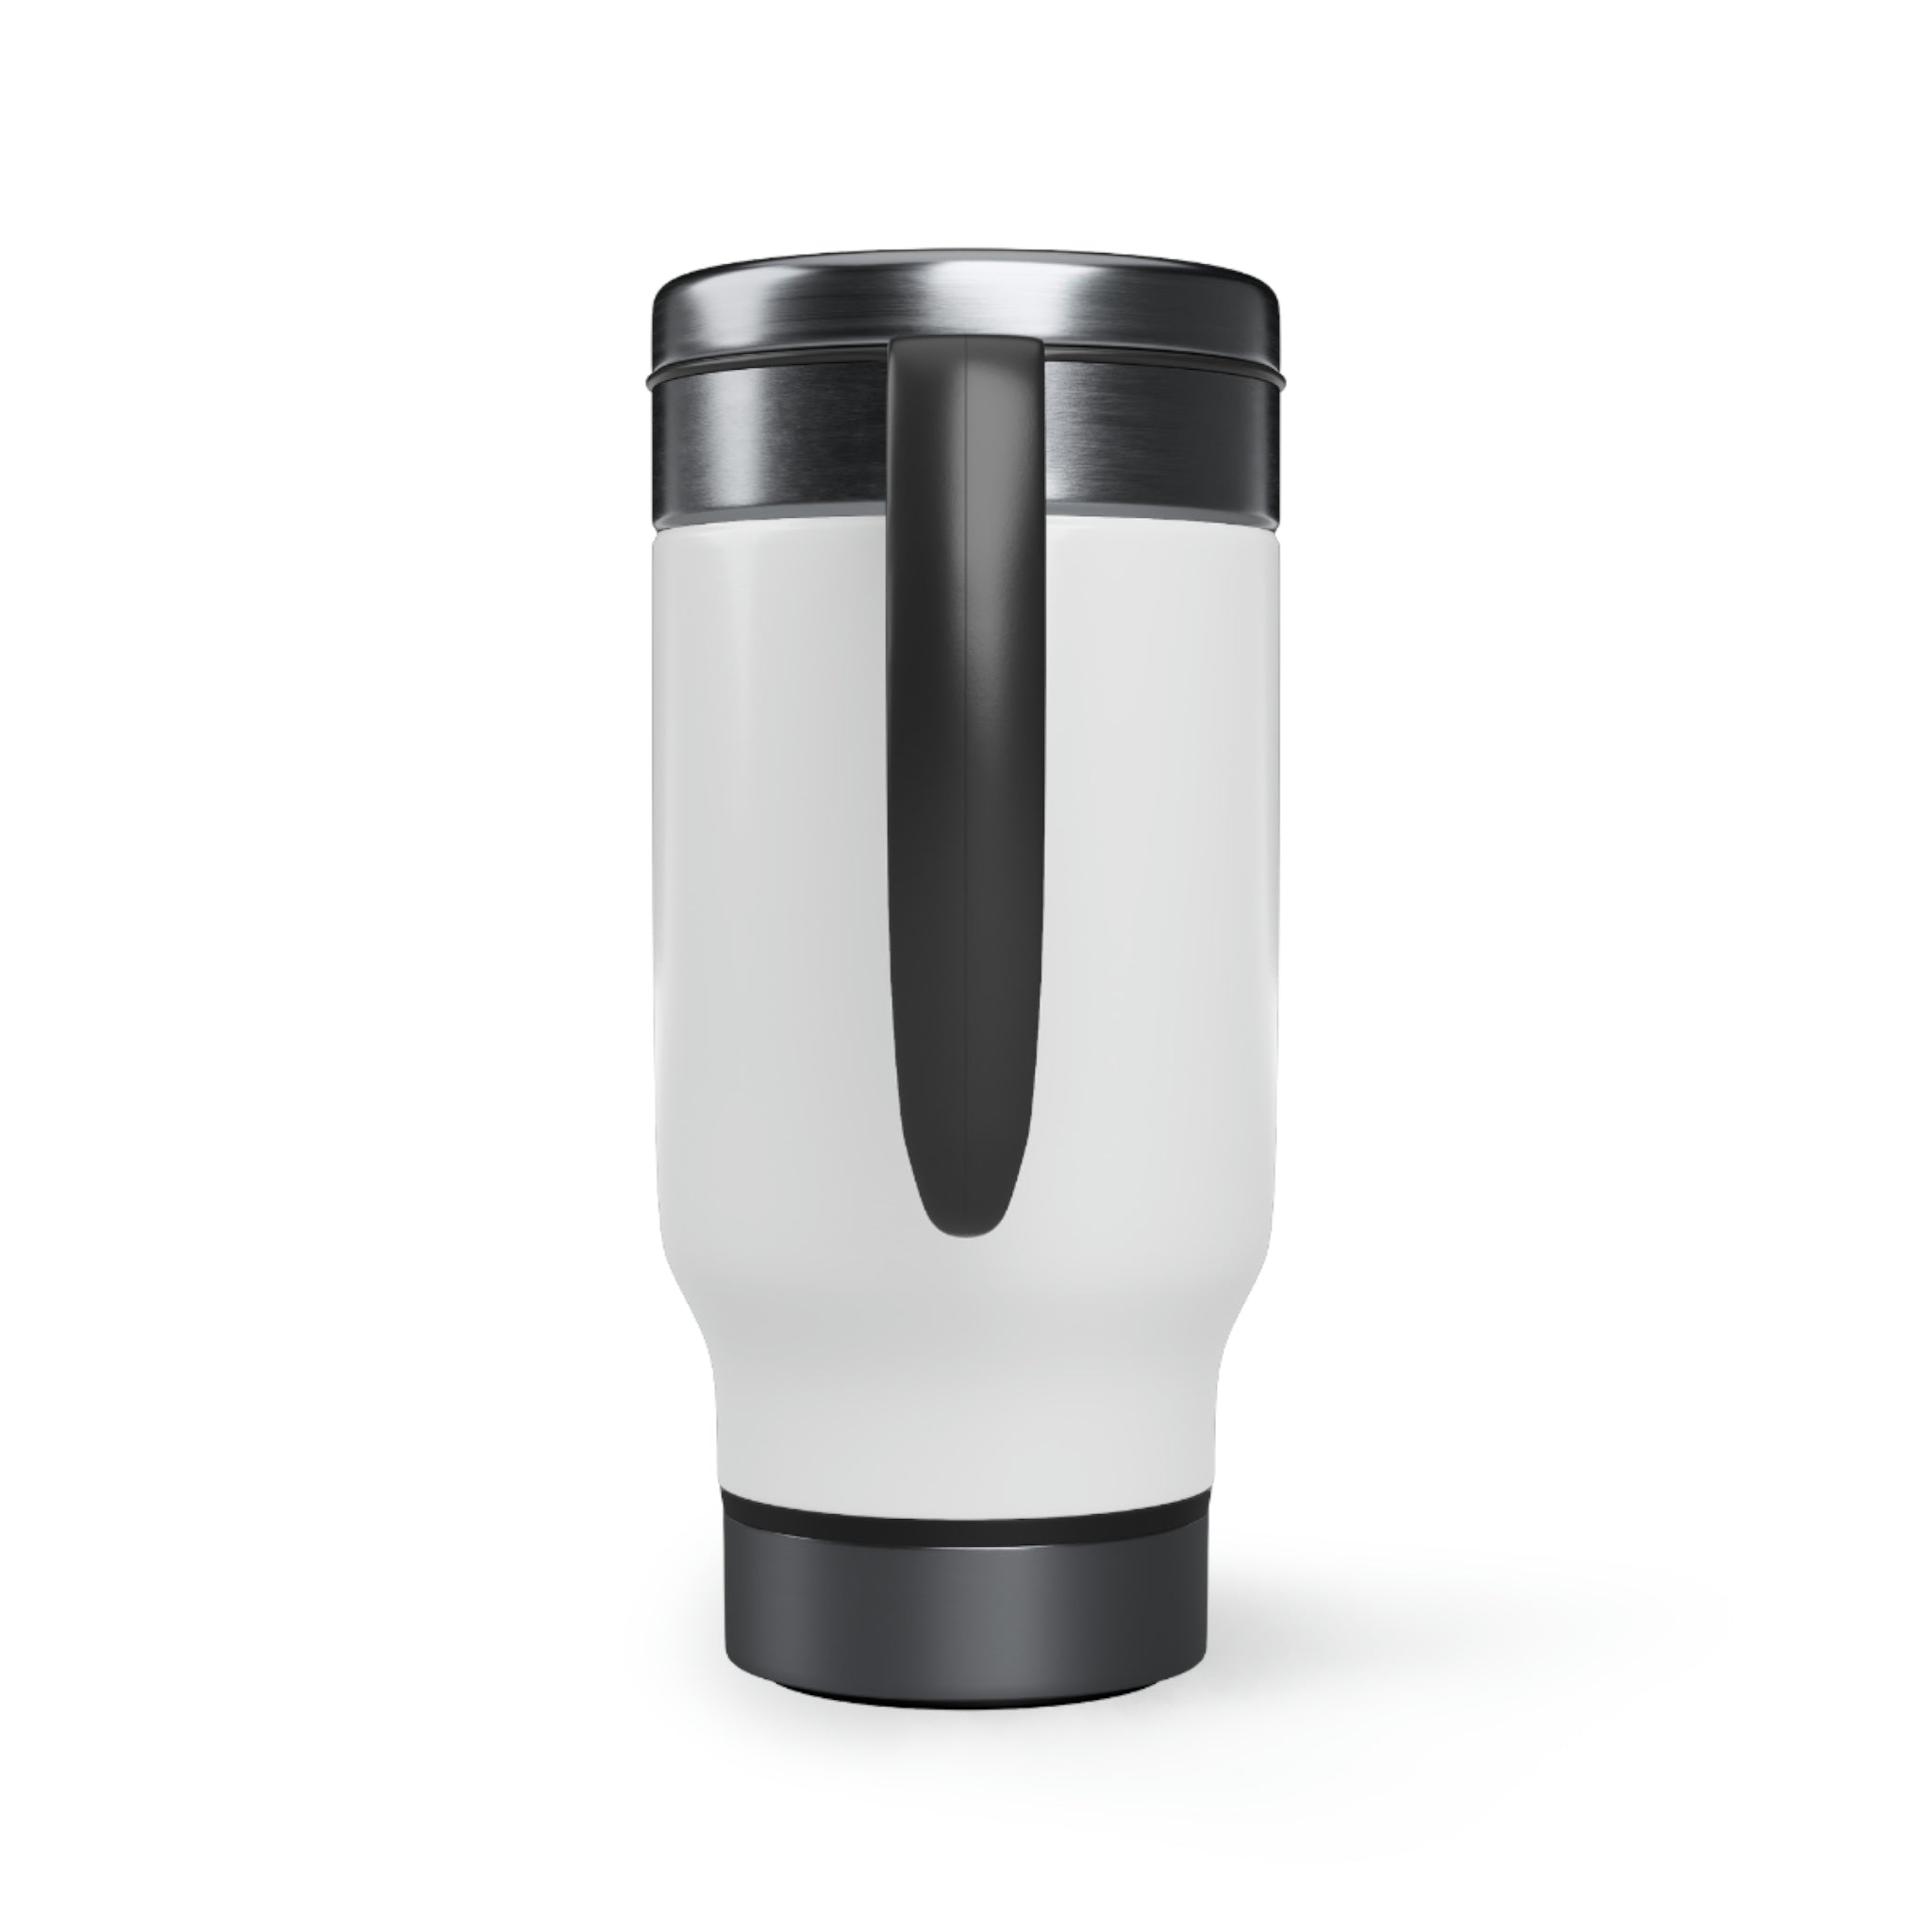 TEA. I really regret all of what I said , Stainless Steel Travel Mug with Handle, 14oz